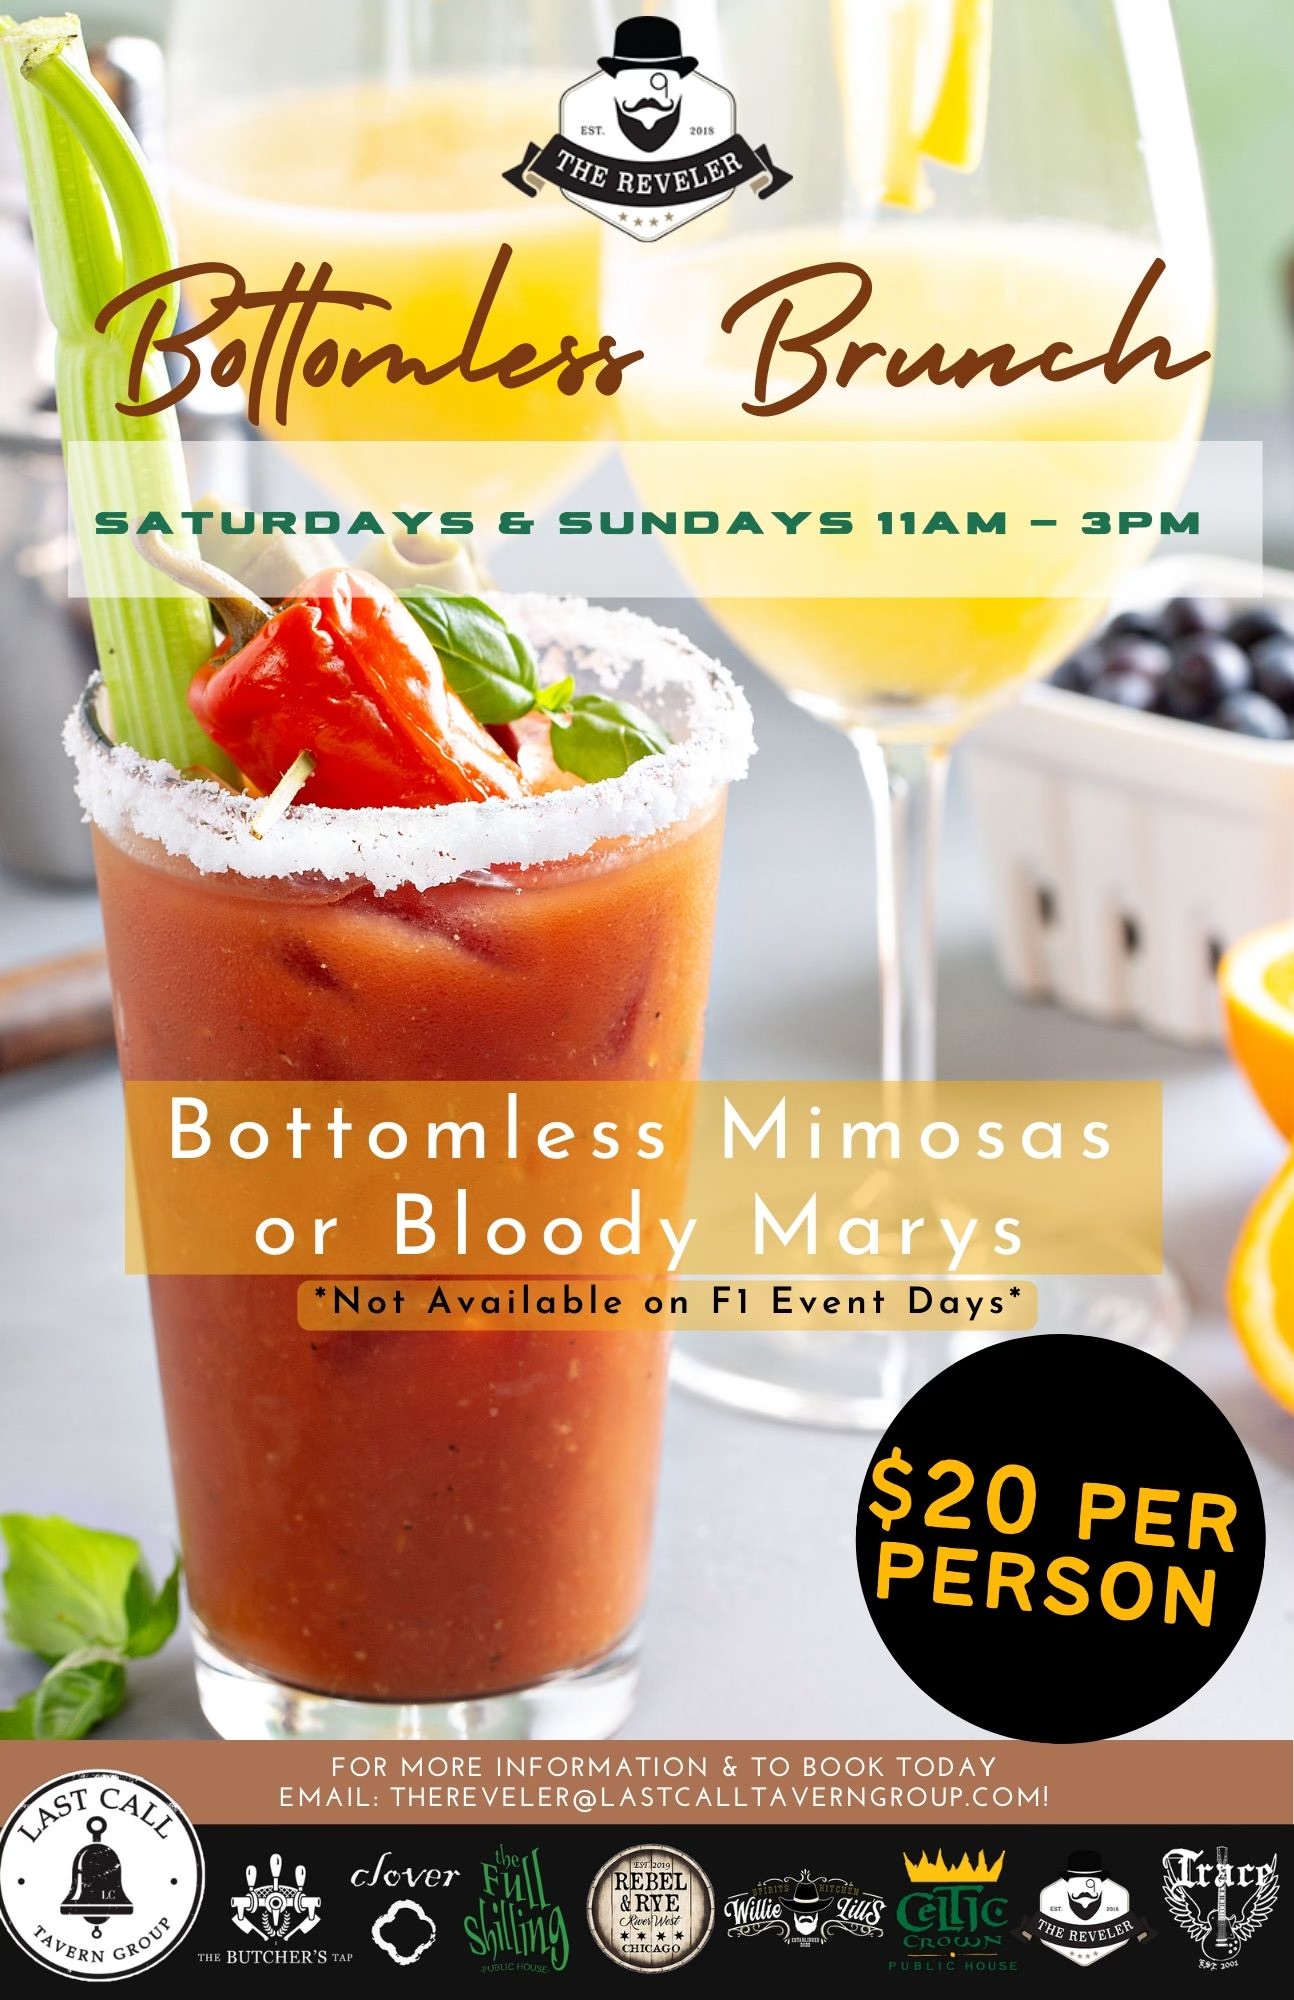 Bottomless Brunch is Back!